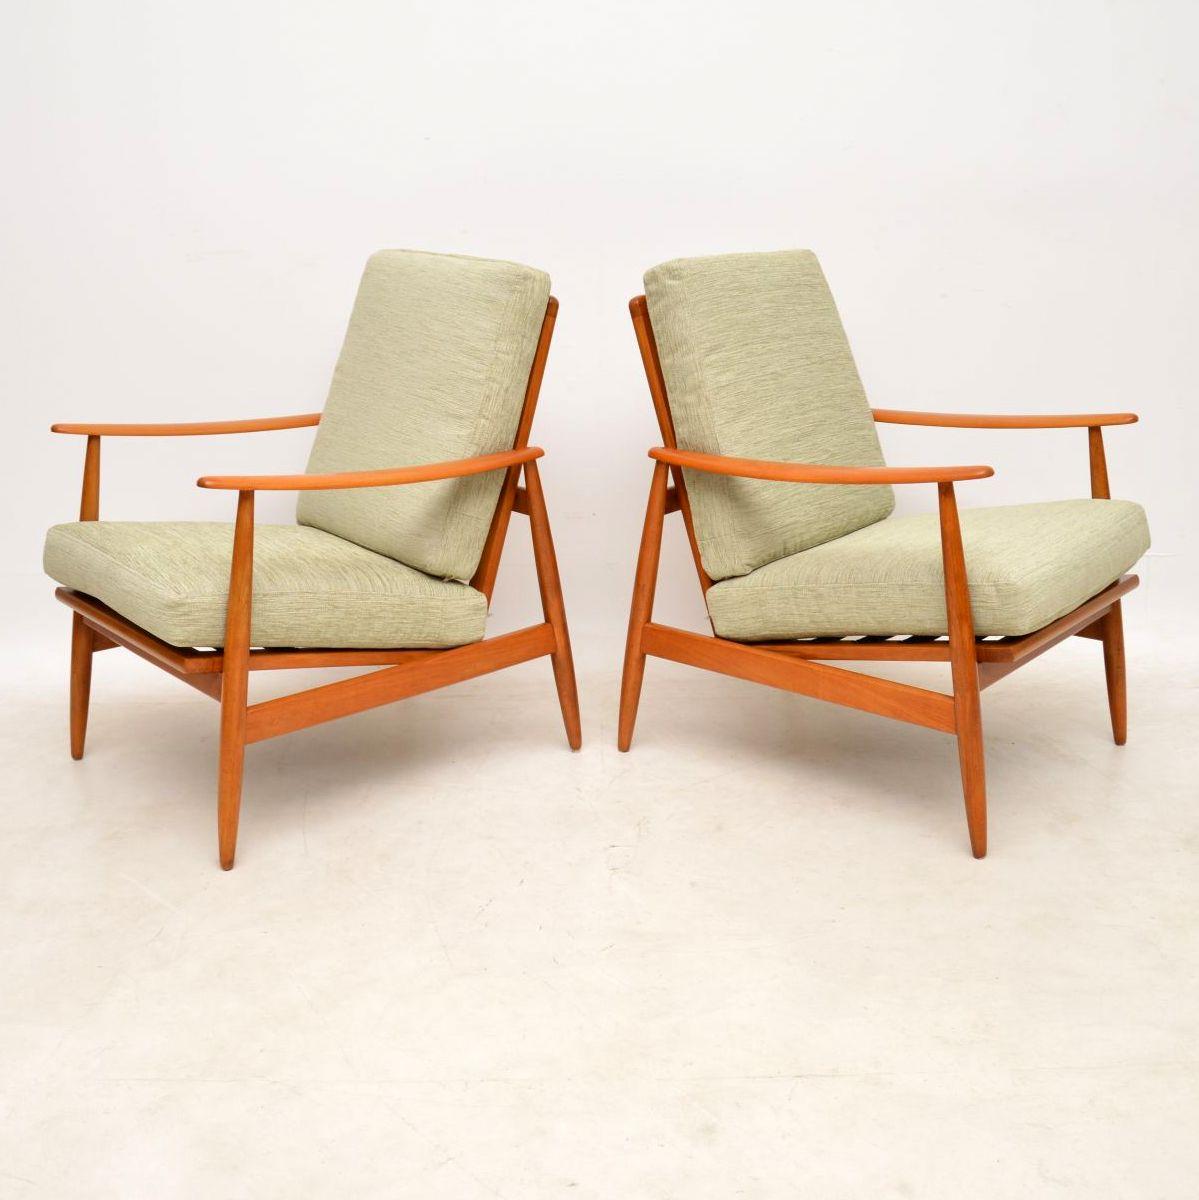 A stylish, elegant and extremely well made pair of Danish vintage armchairs, these date from the 1960s. We have had the frames completely stripped and re-polished to a very high standard, the condition is amazing and they have a lovely, warm color.